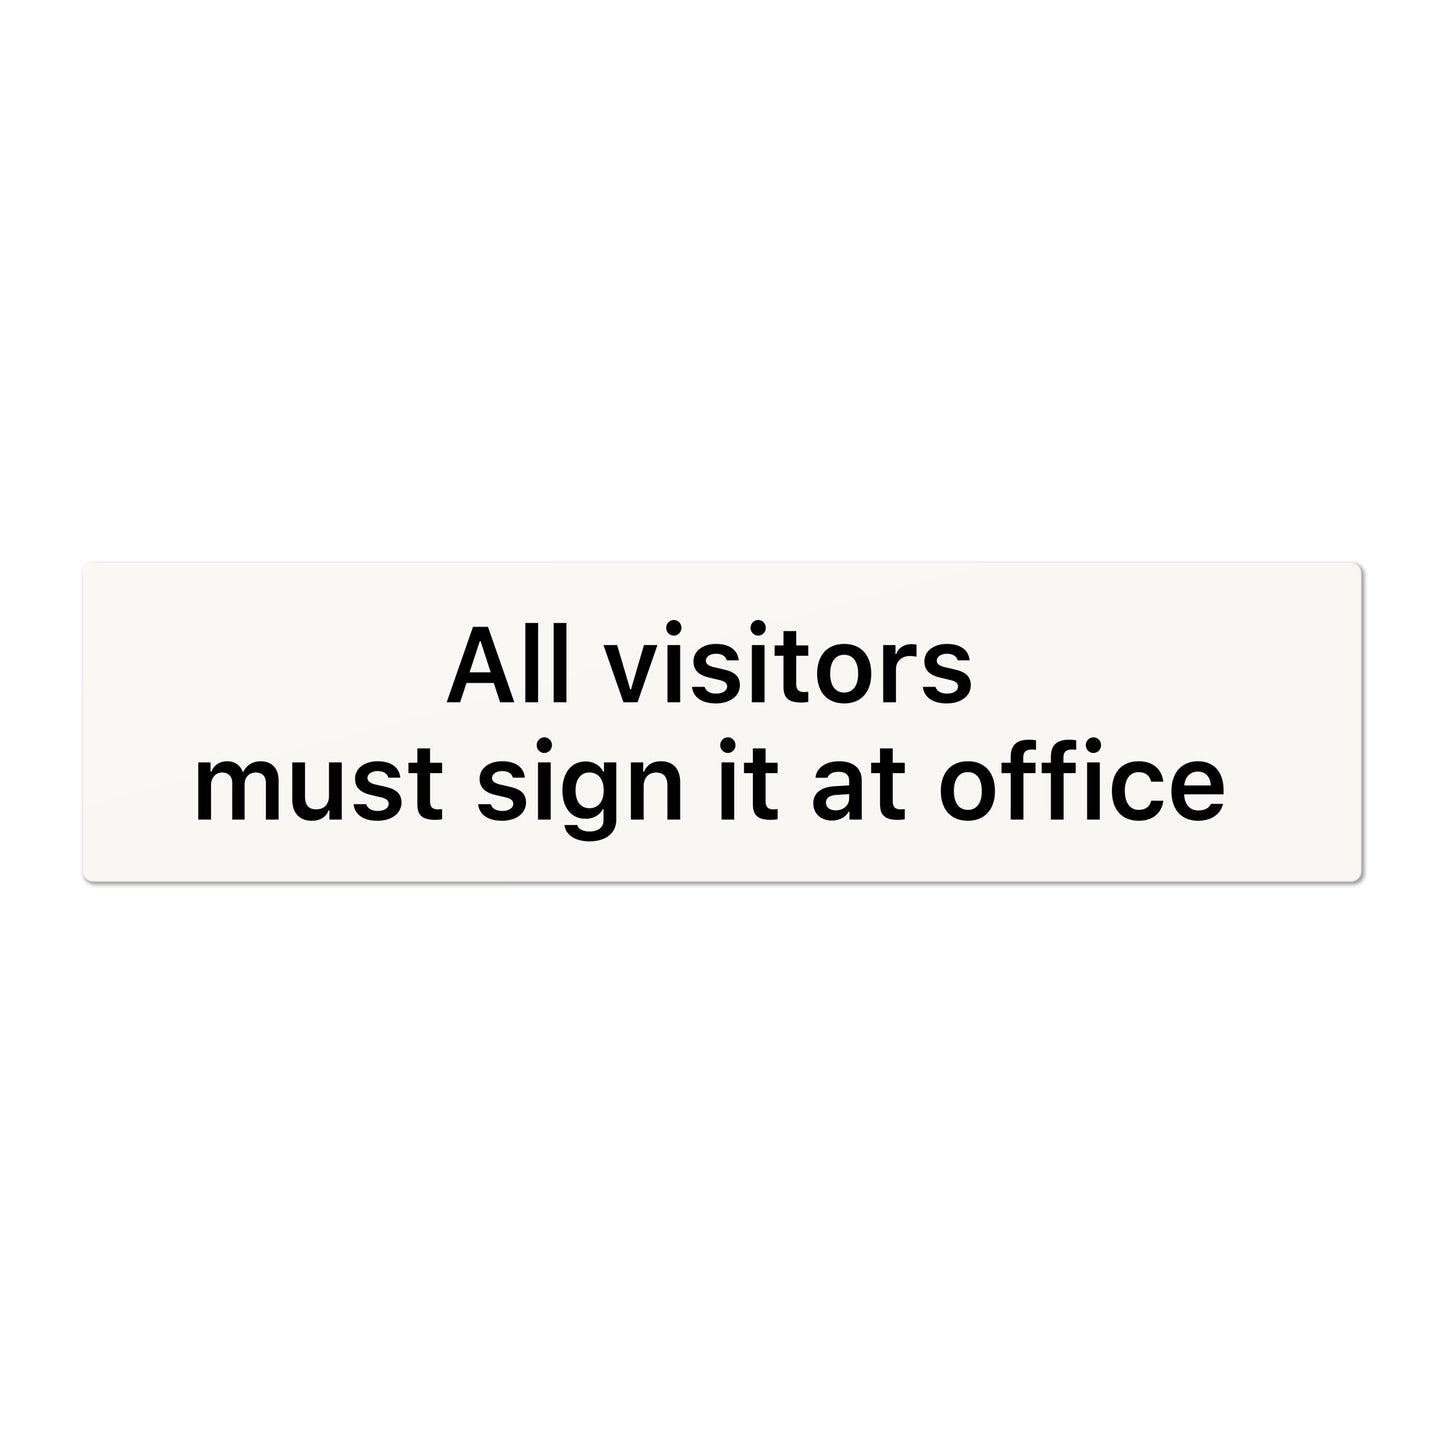 All visitors must sign it at office